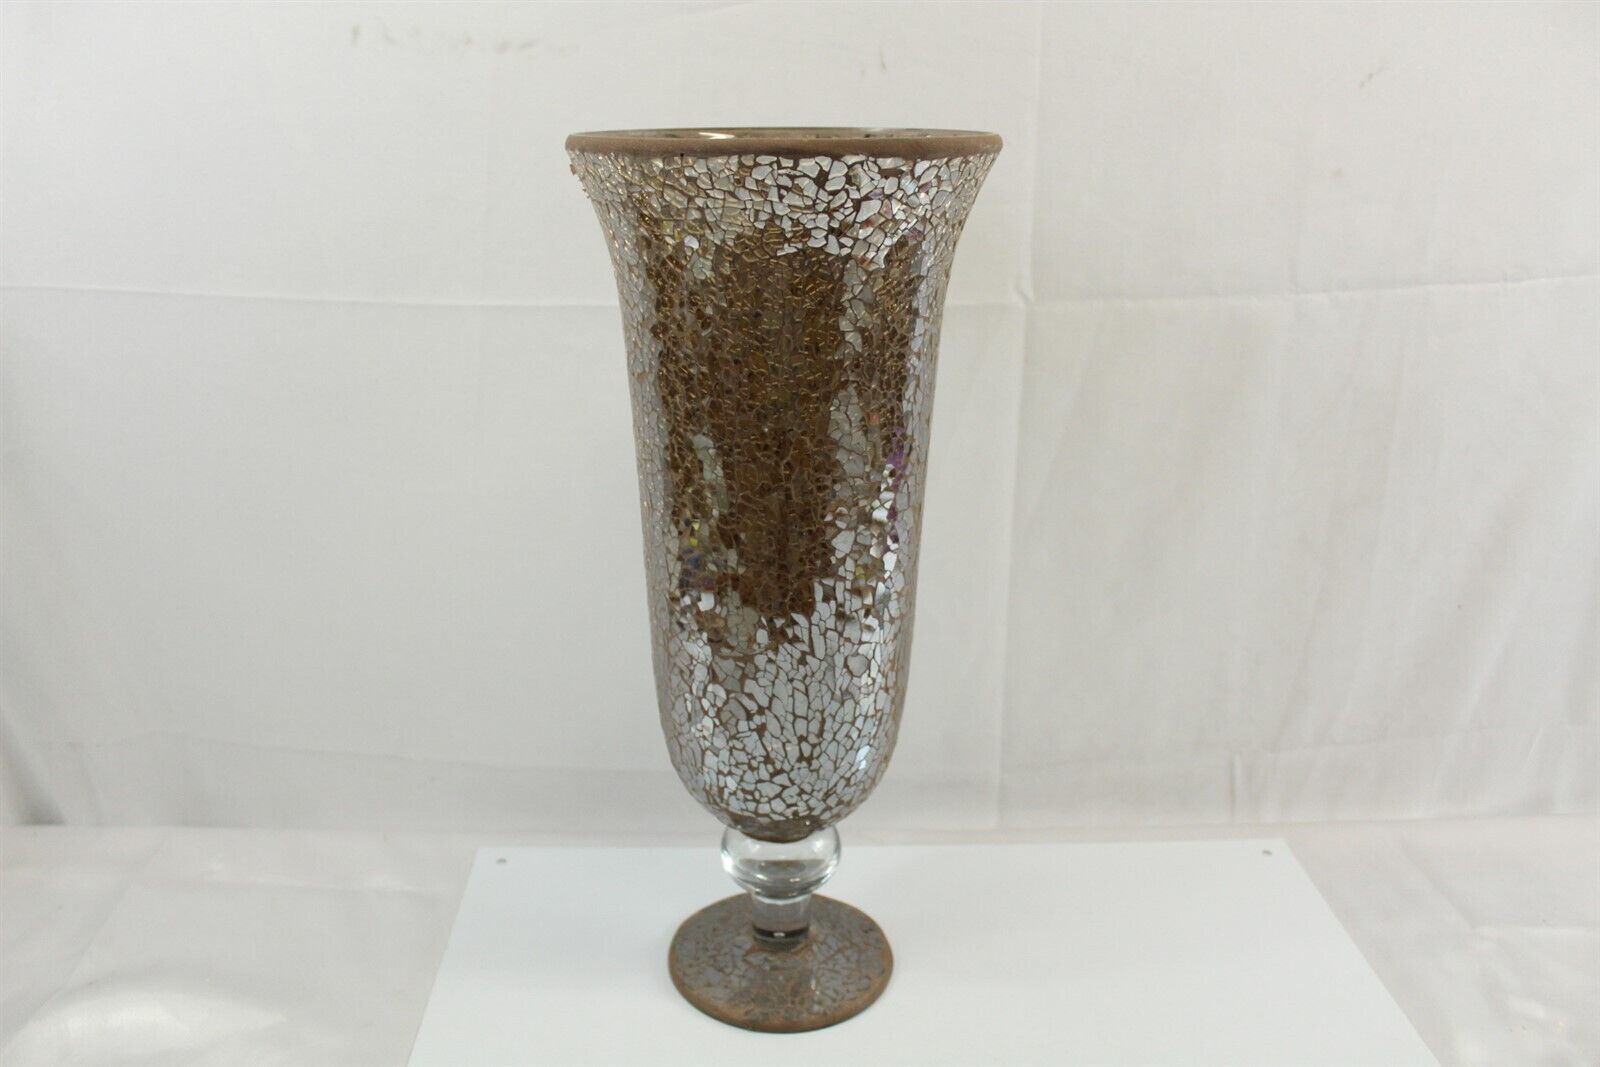 Vintage Large Pedestal Vase With Cracked Glass Finish Smokey Grey With Brown 17